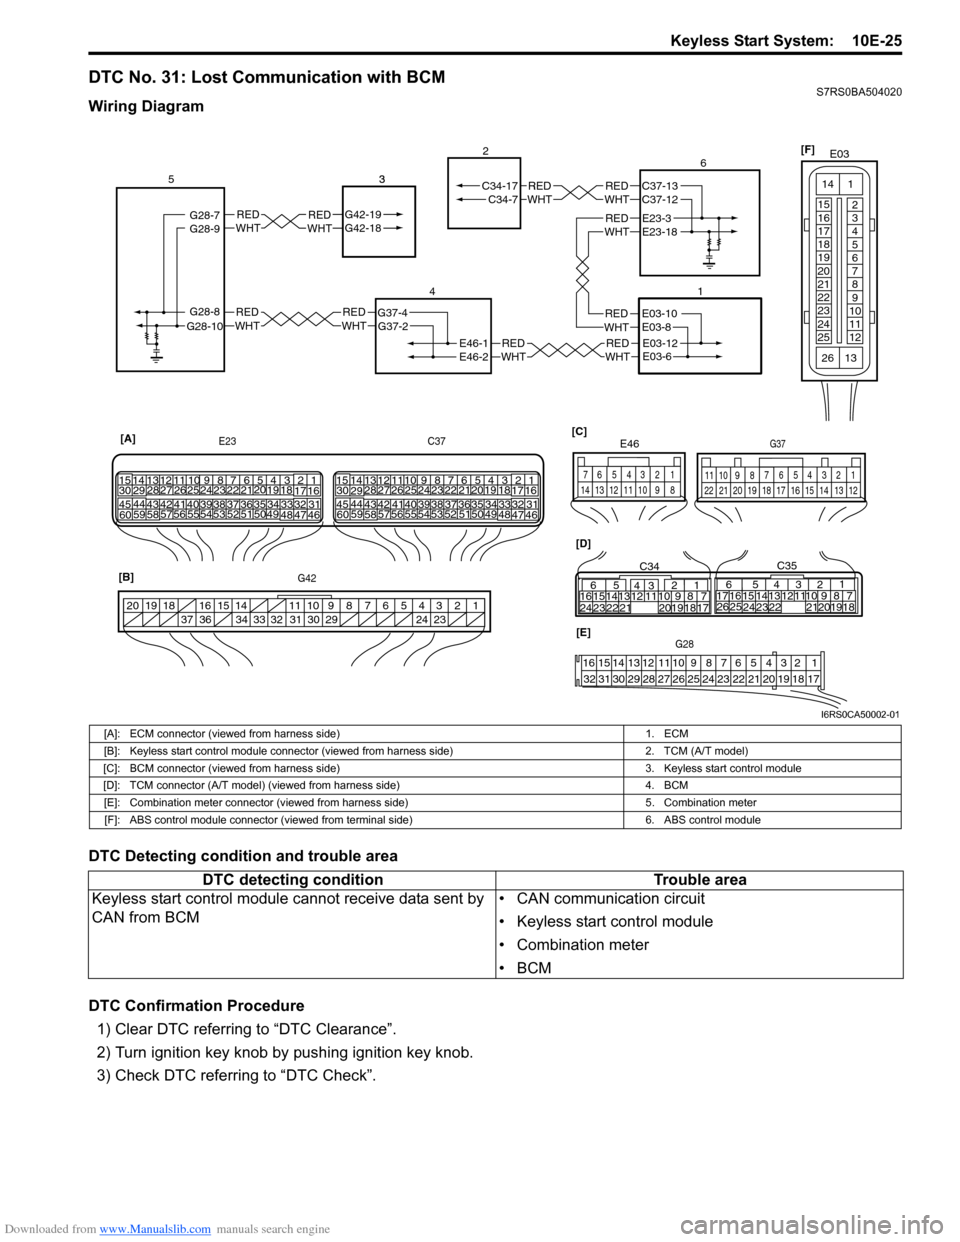 SUZUKI SWIFT 2007 2.G Service Workshop Manual Downloaded from www.Manualslib.com manuals search engine Keyless Start System:  10E-25
DTC No. 31: Lost Communication with BCMS7RS0BA504020
Wiring Diagram
DTC Detecting condition and trouble area
DTC 